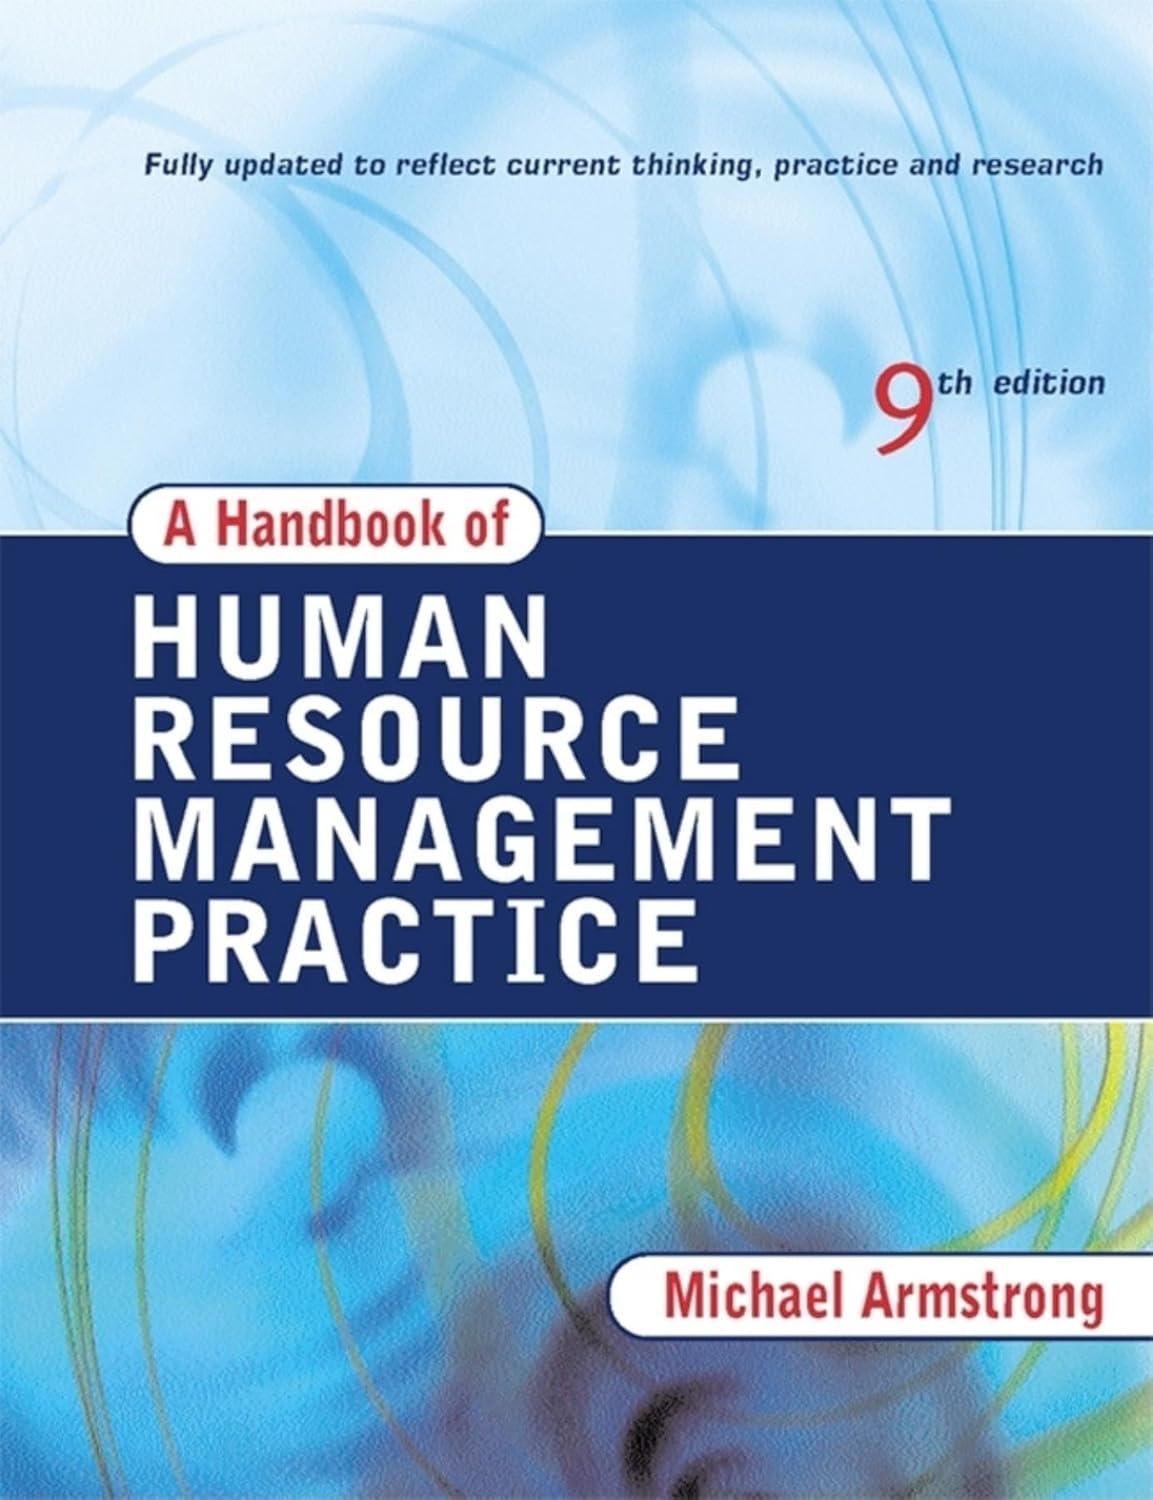 a handbook of human resource management practice 9th edition michael armstrong 0749441050, 9780749441050